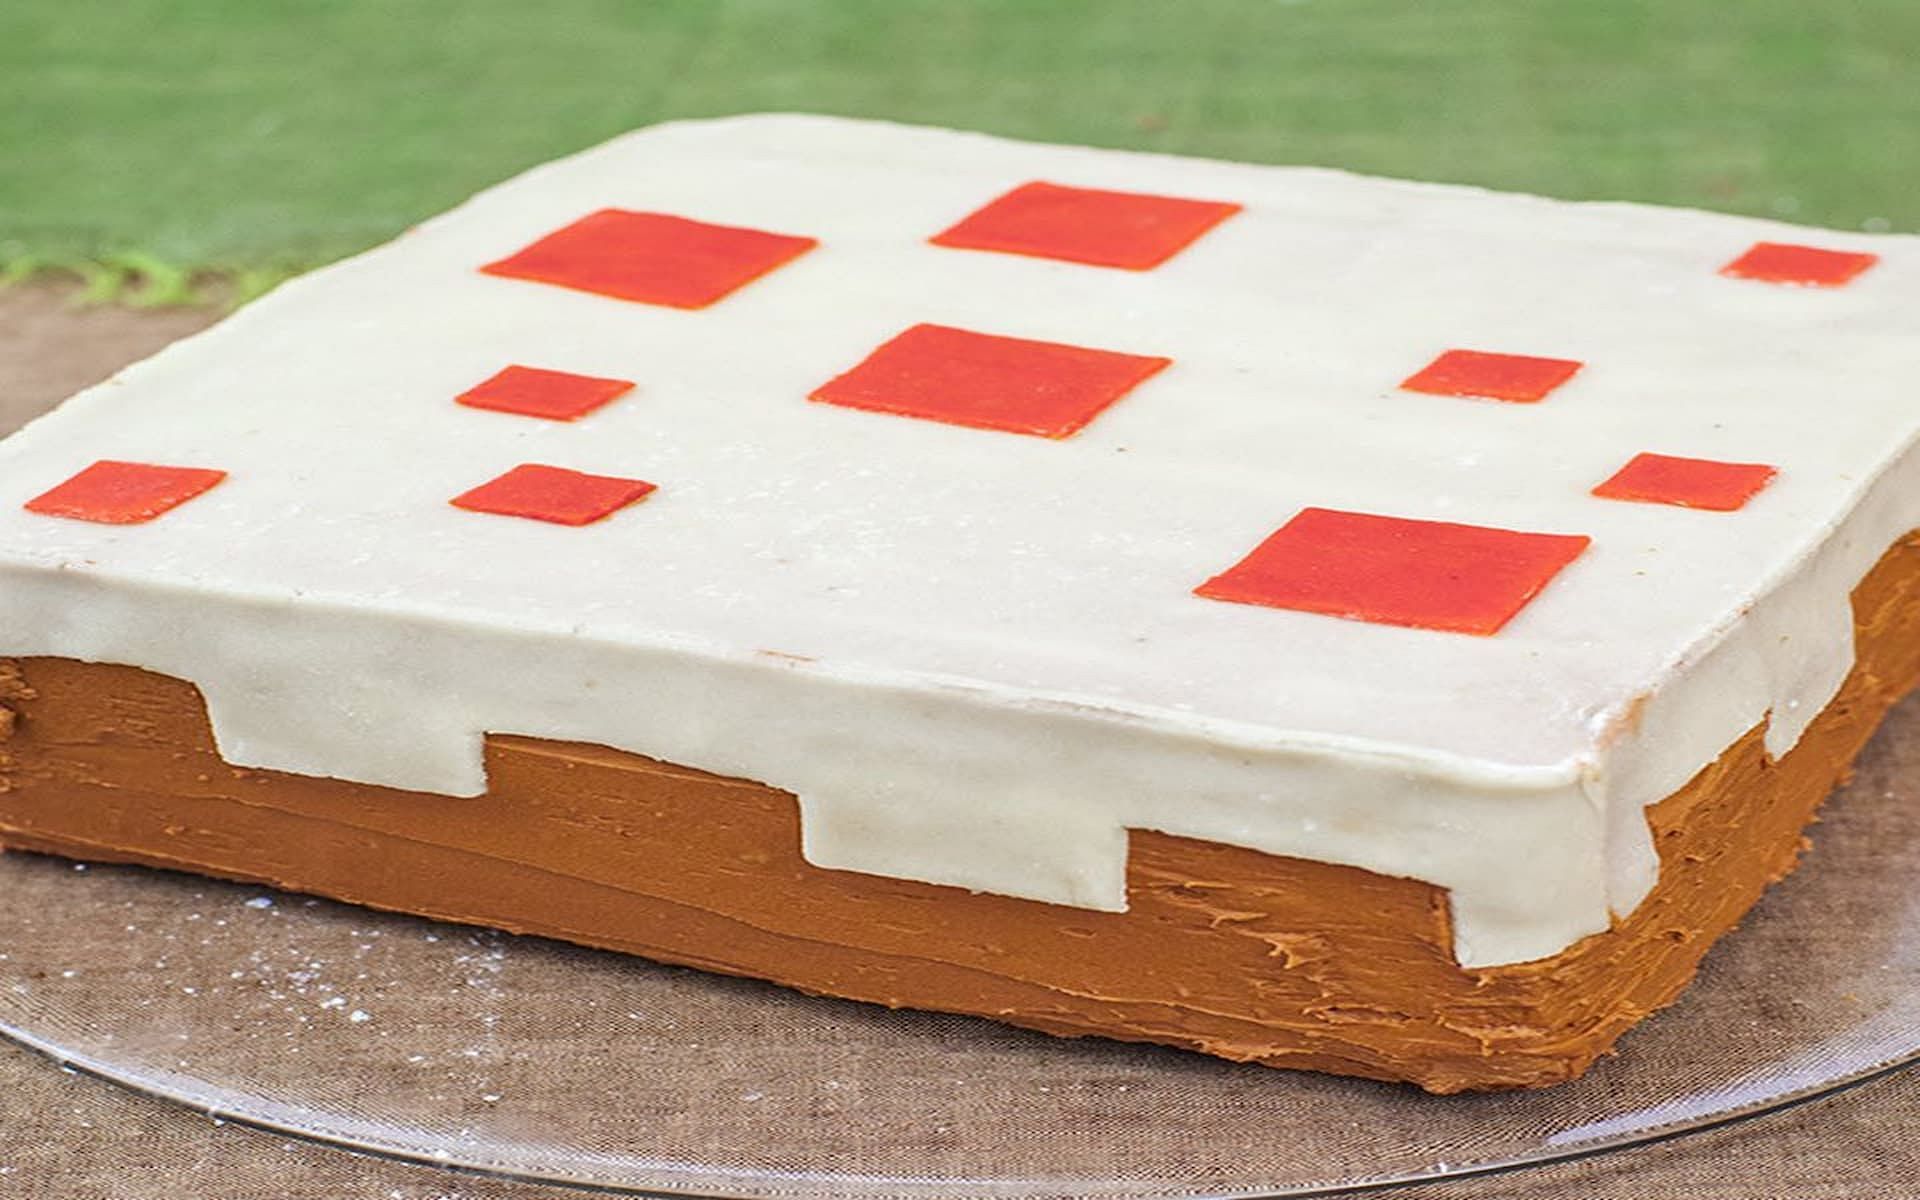 Fans of Minecraft can get some pretty nifty cakes on their birthday (Image via allrecipes.com)